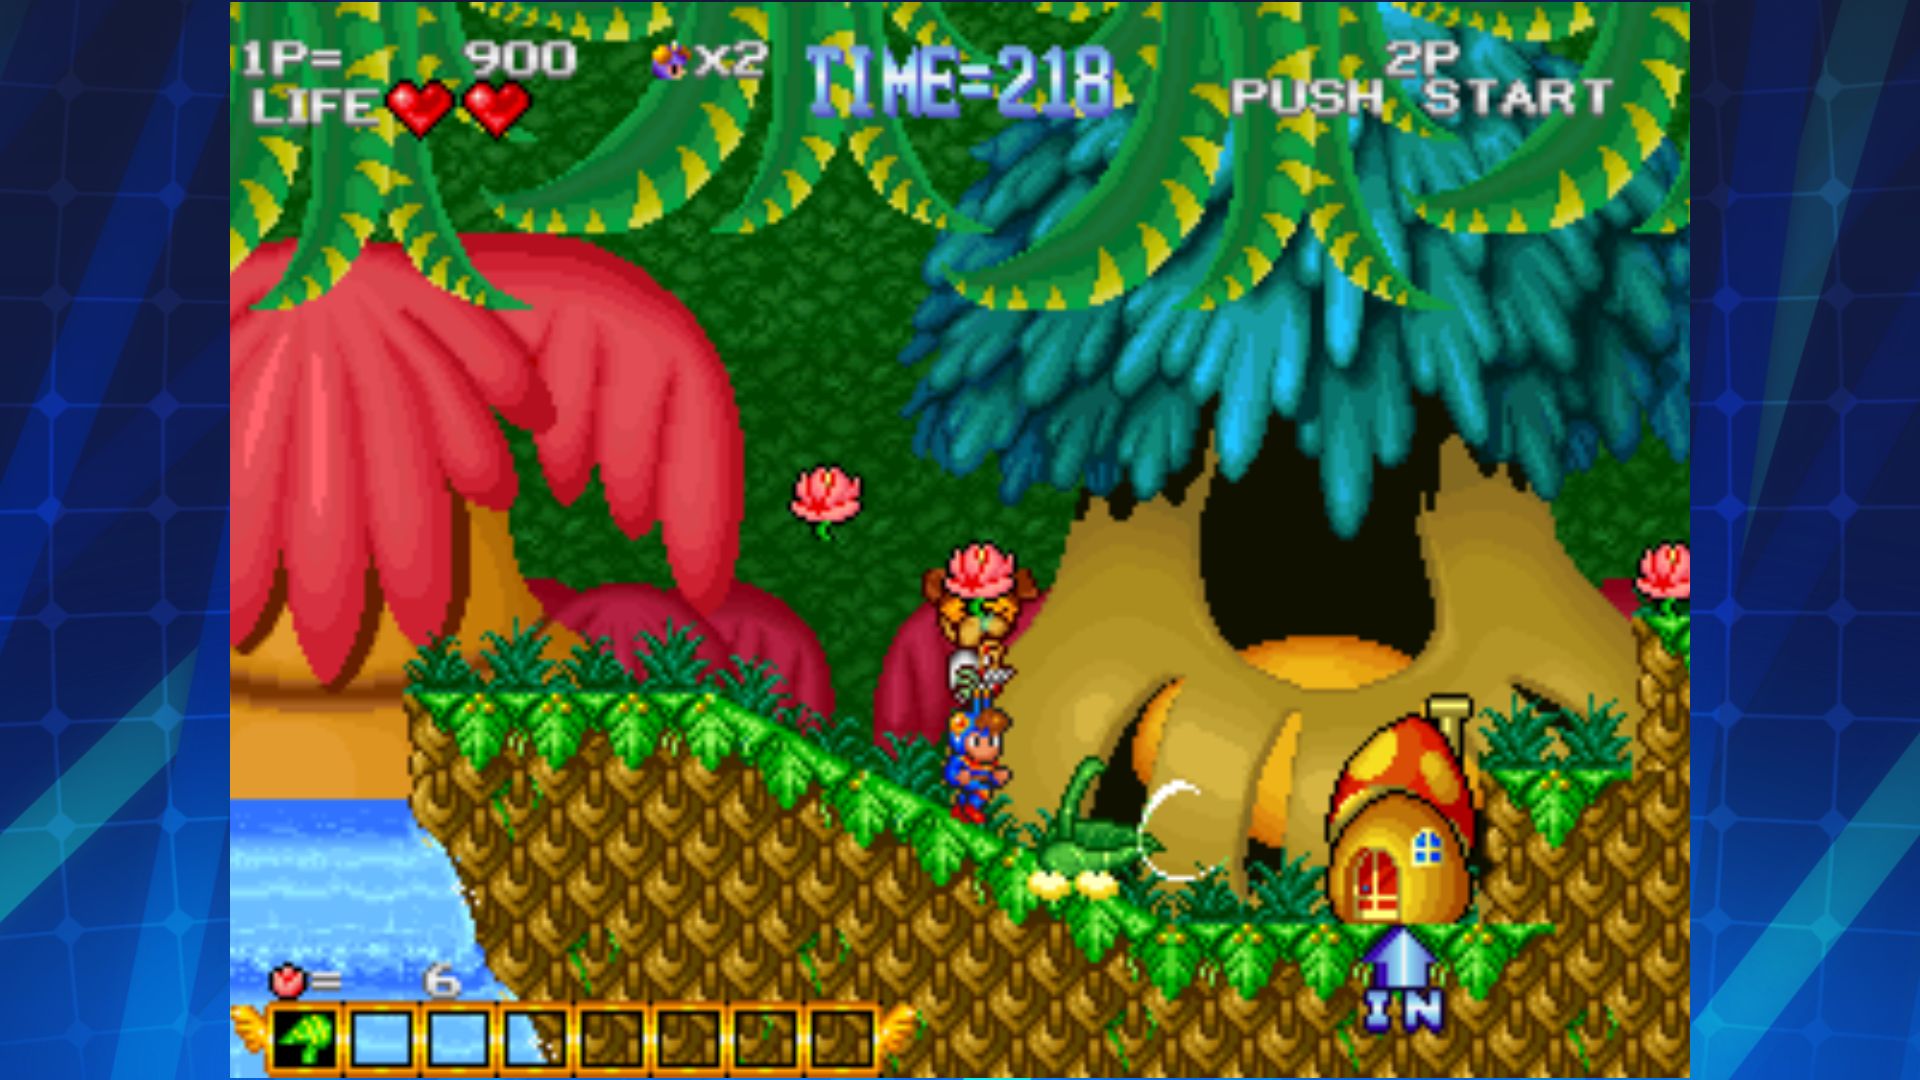 Gameplay of the BLUE'S JOURNEY ACA NEOGEO for Android phone or tablet.